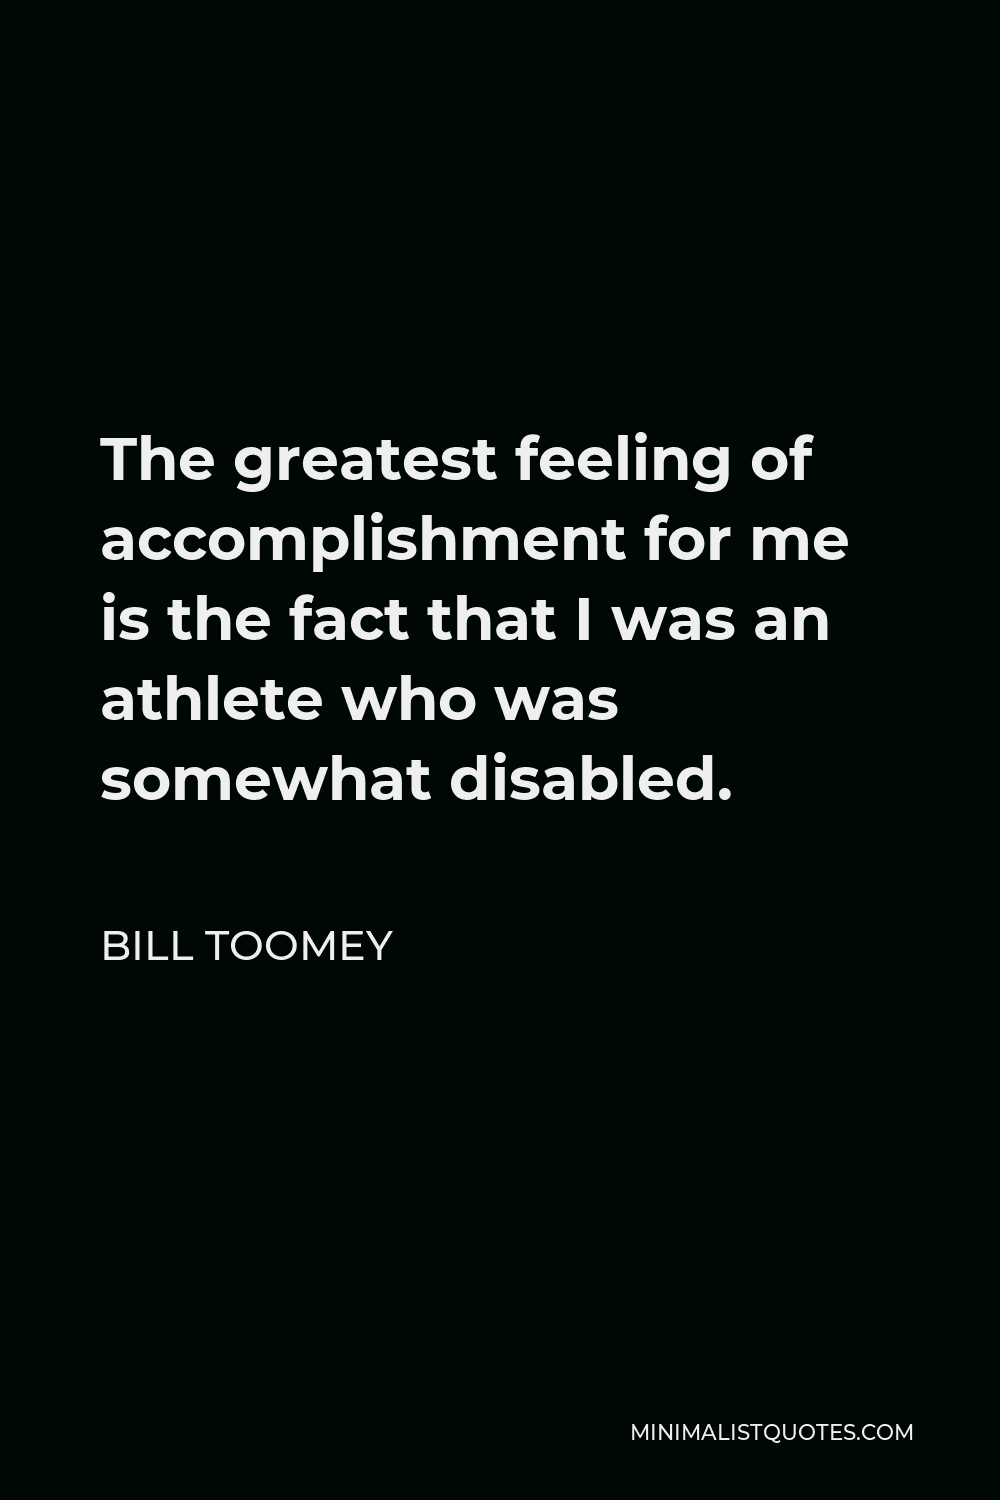 Bill Toomey Quote - The greatest feeling of accomplishment for me is the fact that I was an athlete who was somewhat disabled.